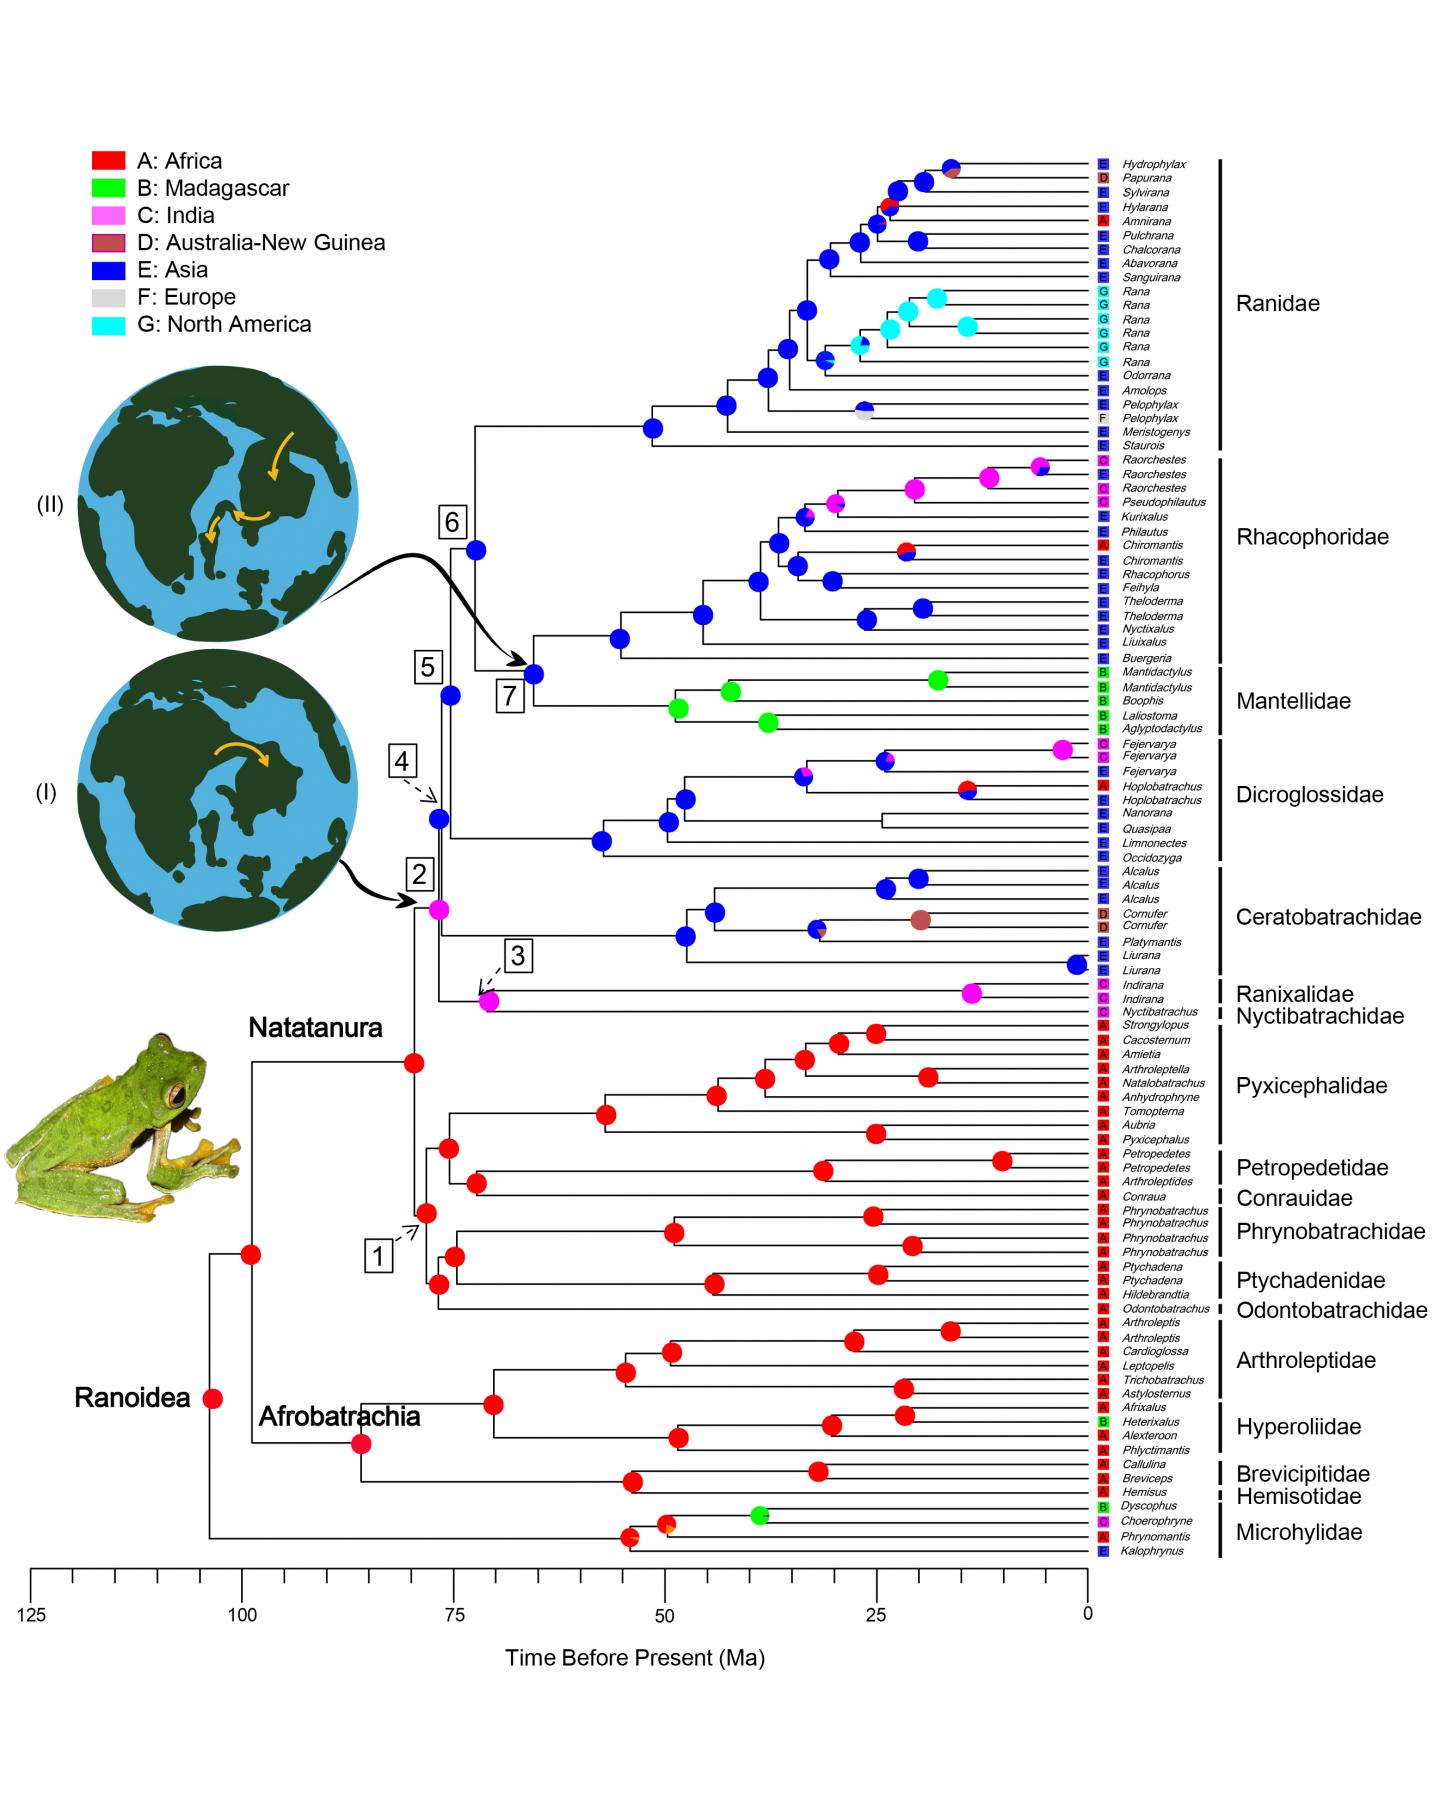 Natatanuran Frogs used the Indian Plate to Step-stone Disperse and Radiate across the Indian Ocean